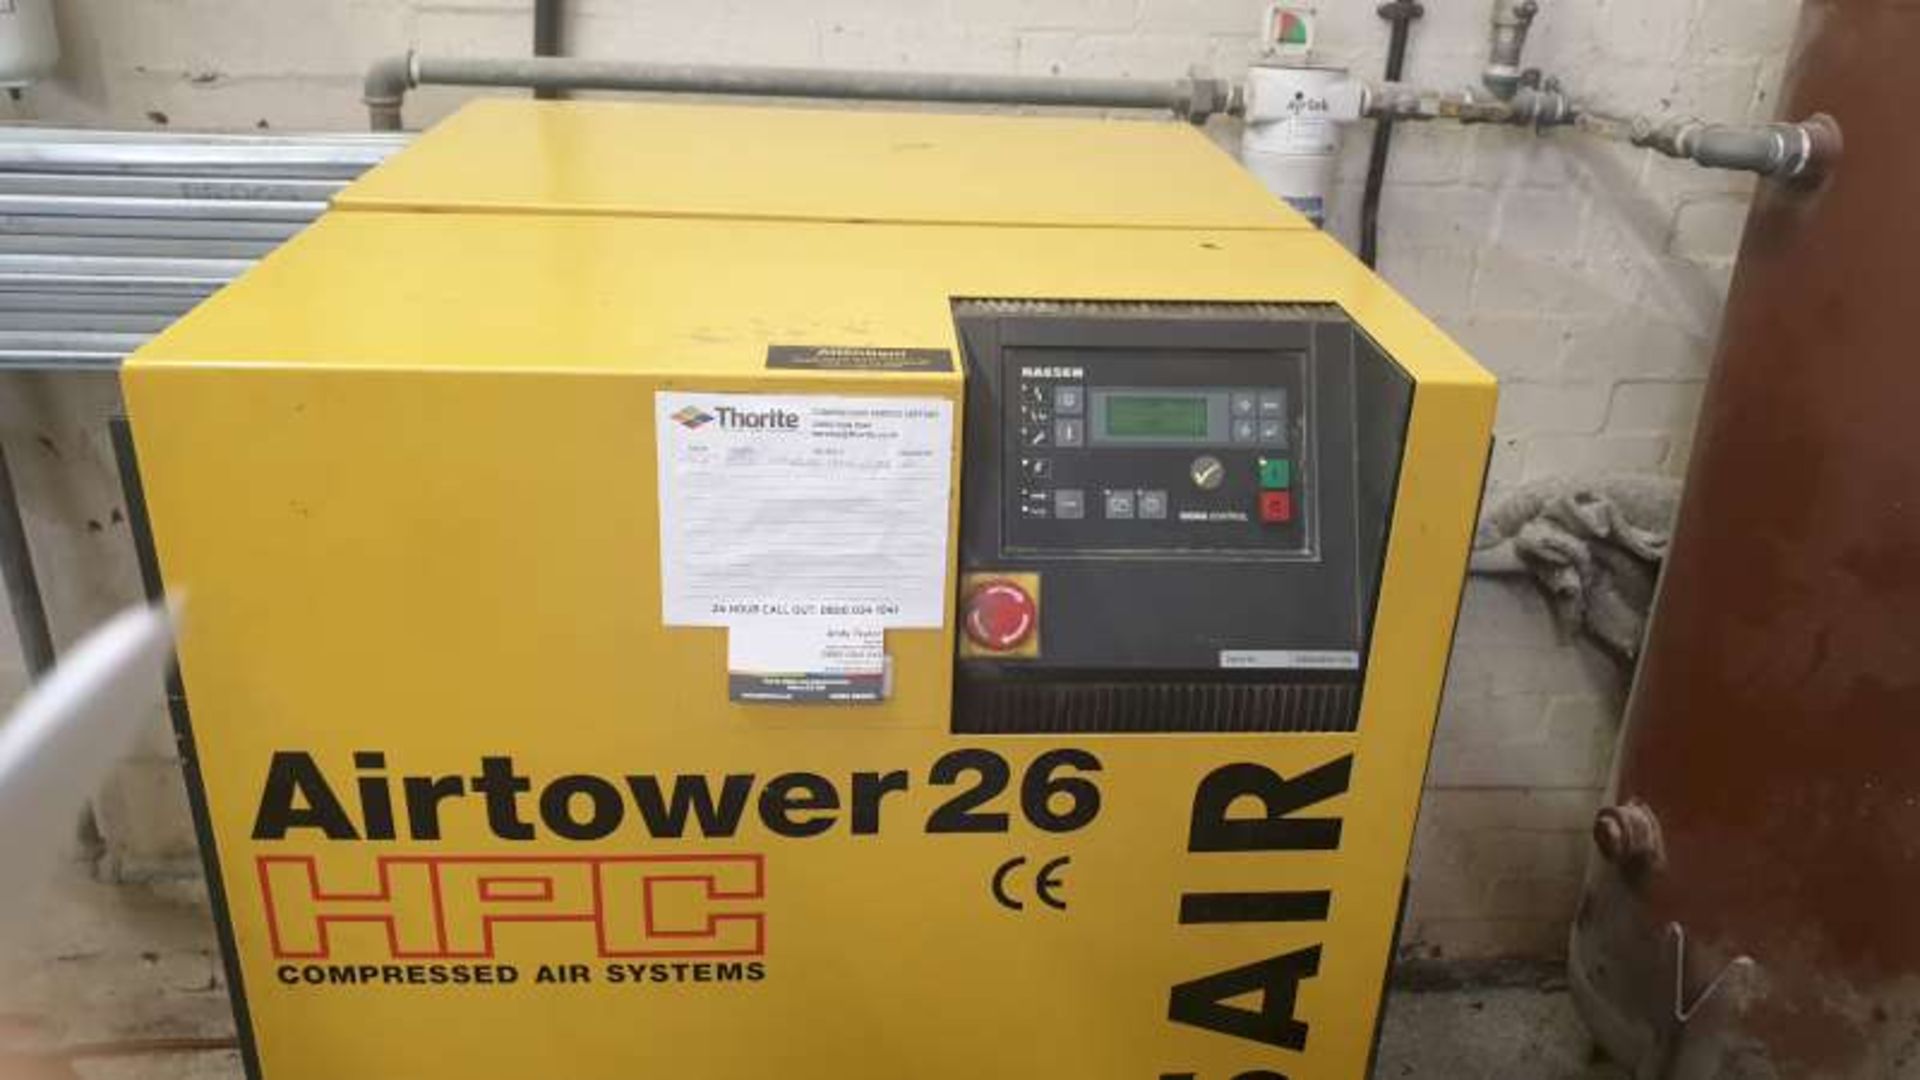 HPC AIRTOWER 26 COMPRESSOR SLAVE TANK AND IN-LINE FILTERS